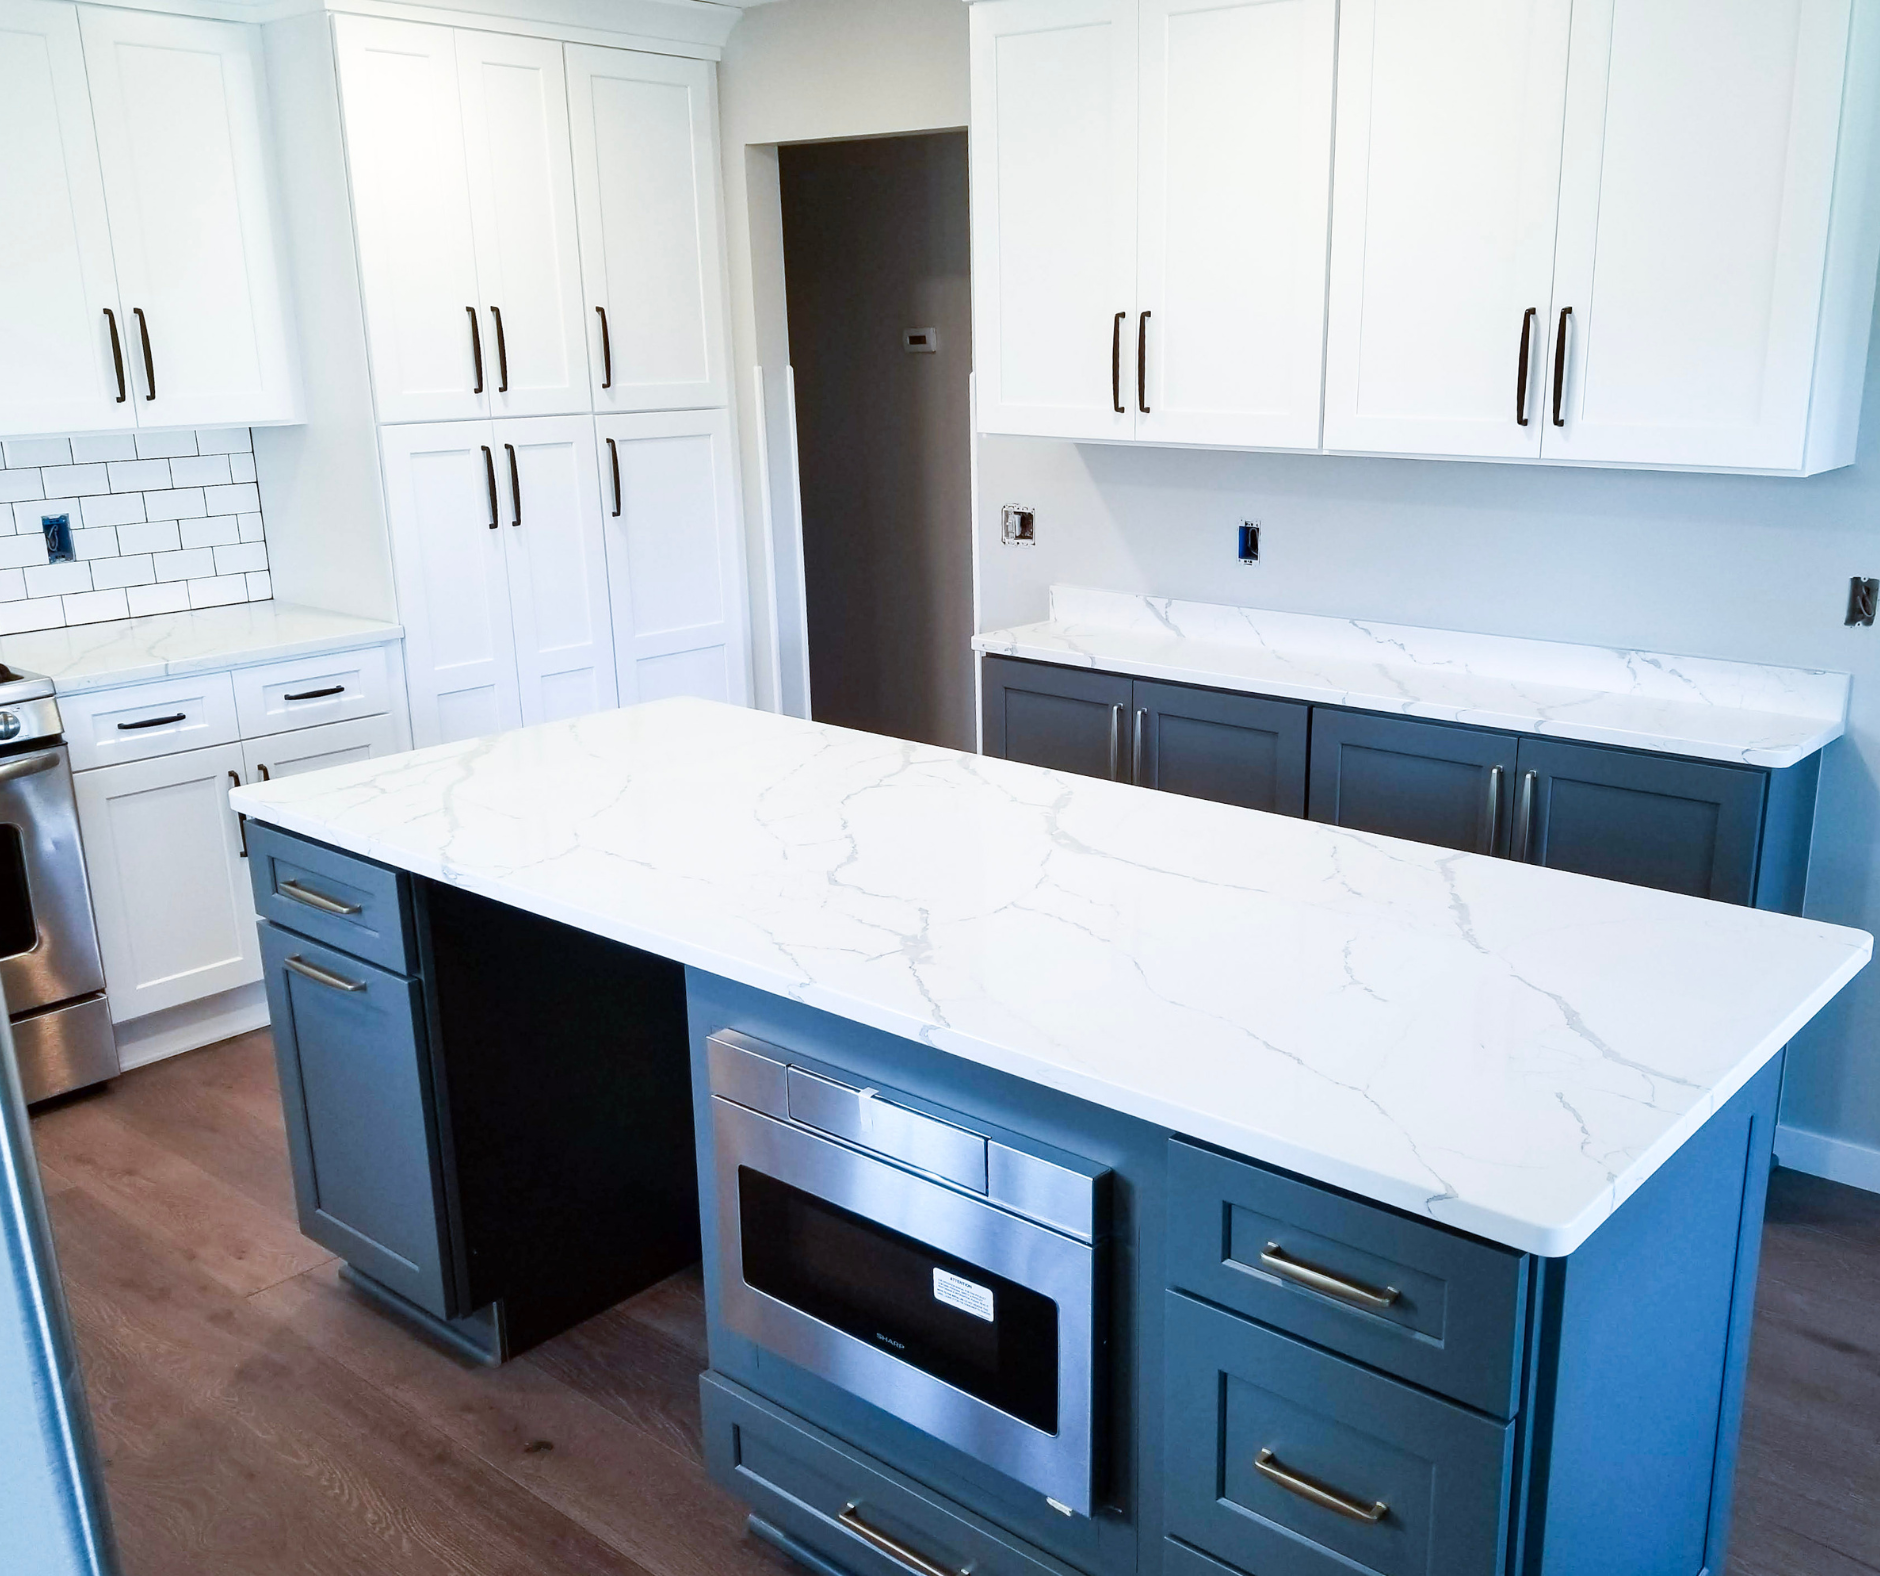 Beautiful, remodeled kitchen with blue lower cabinets, white upper cabinets, and white countertops. There is a large kitchen island with an oven in it and all hardware is modern and dark colored.